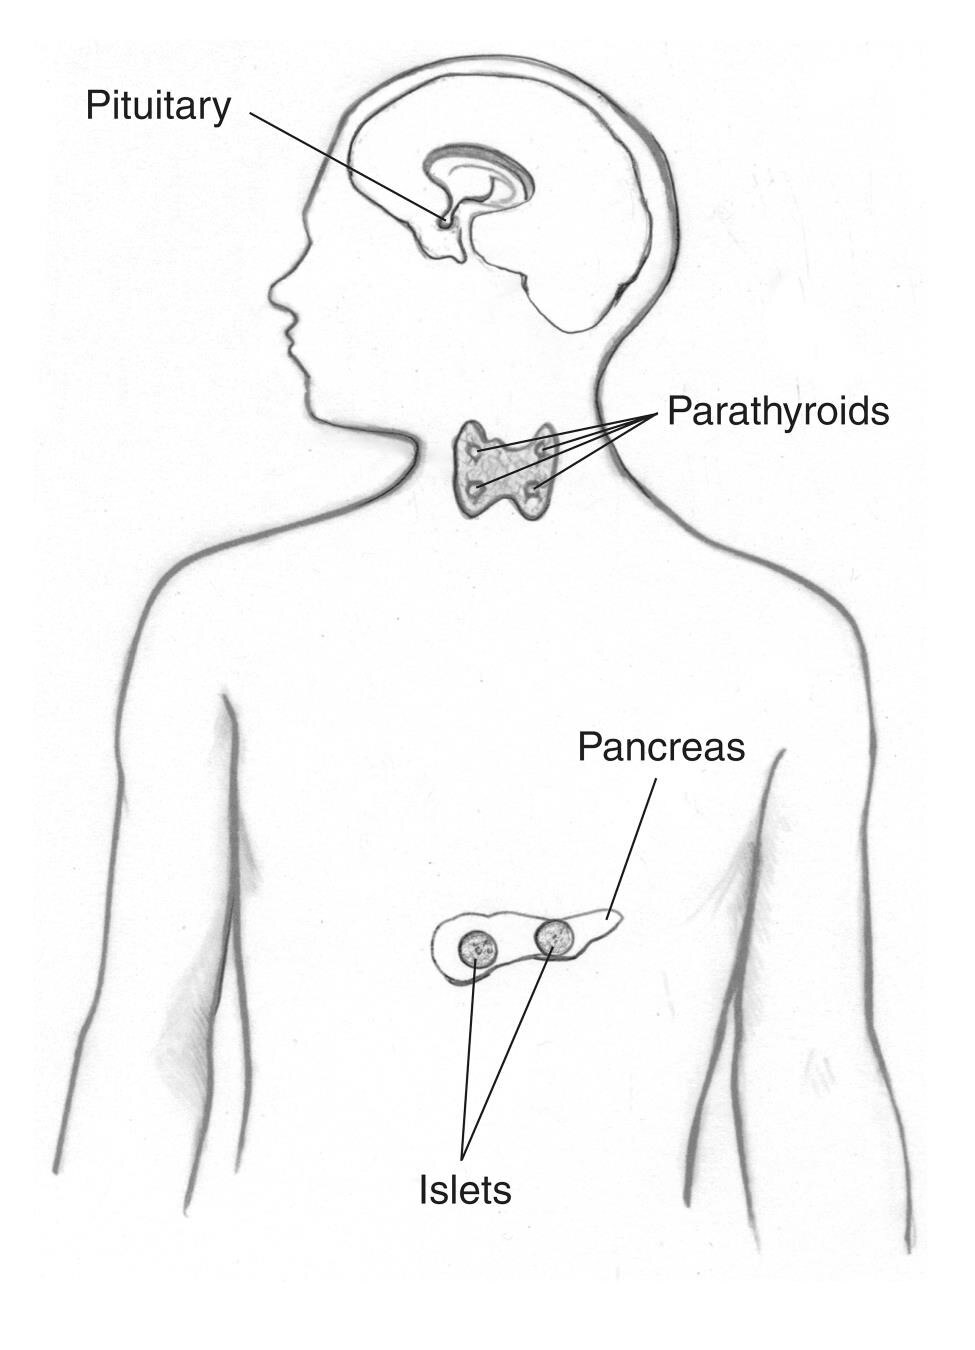 The pituitary gland, parathyroid glands, pancreas, and islets inside the pancreas